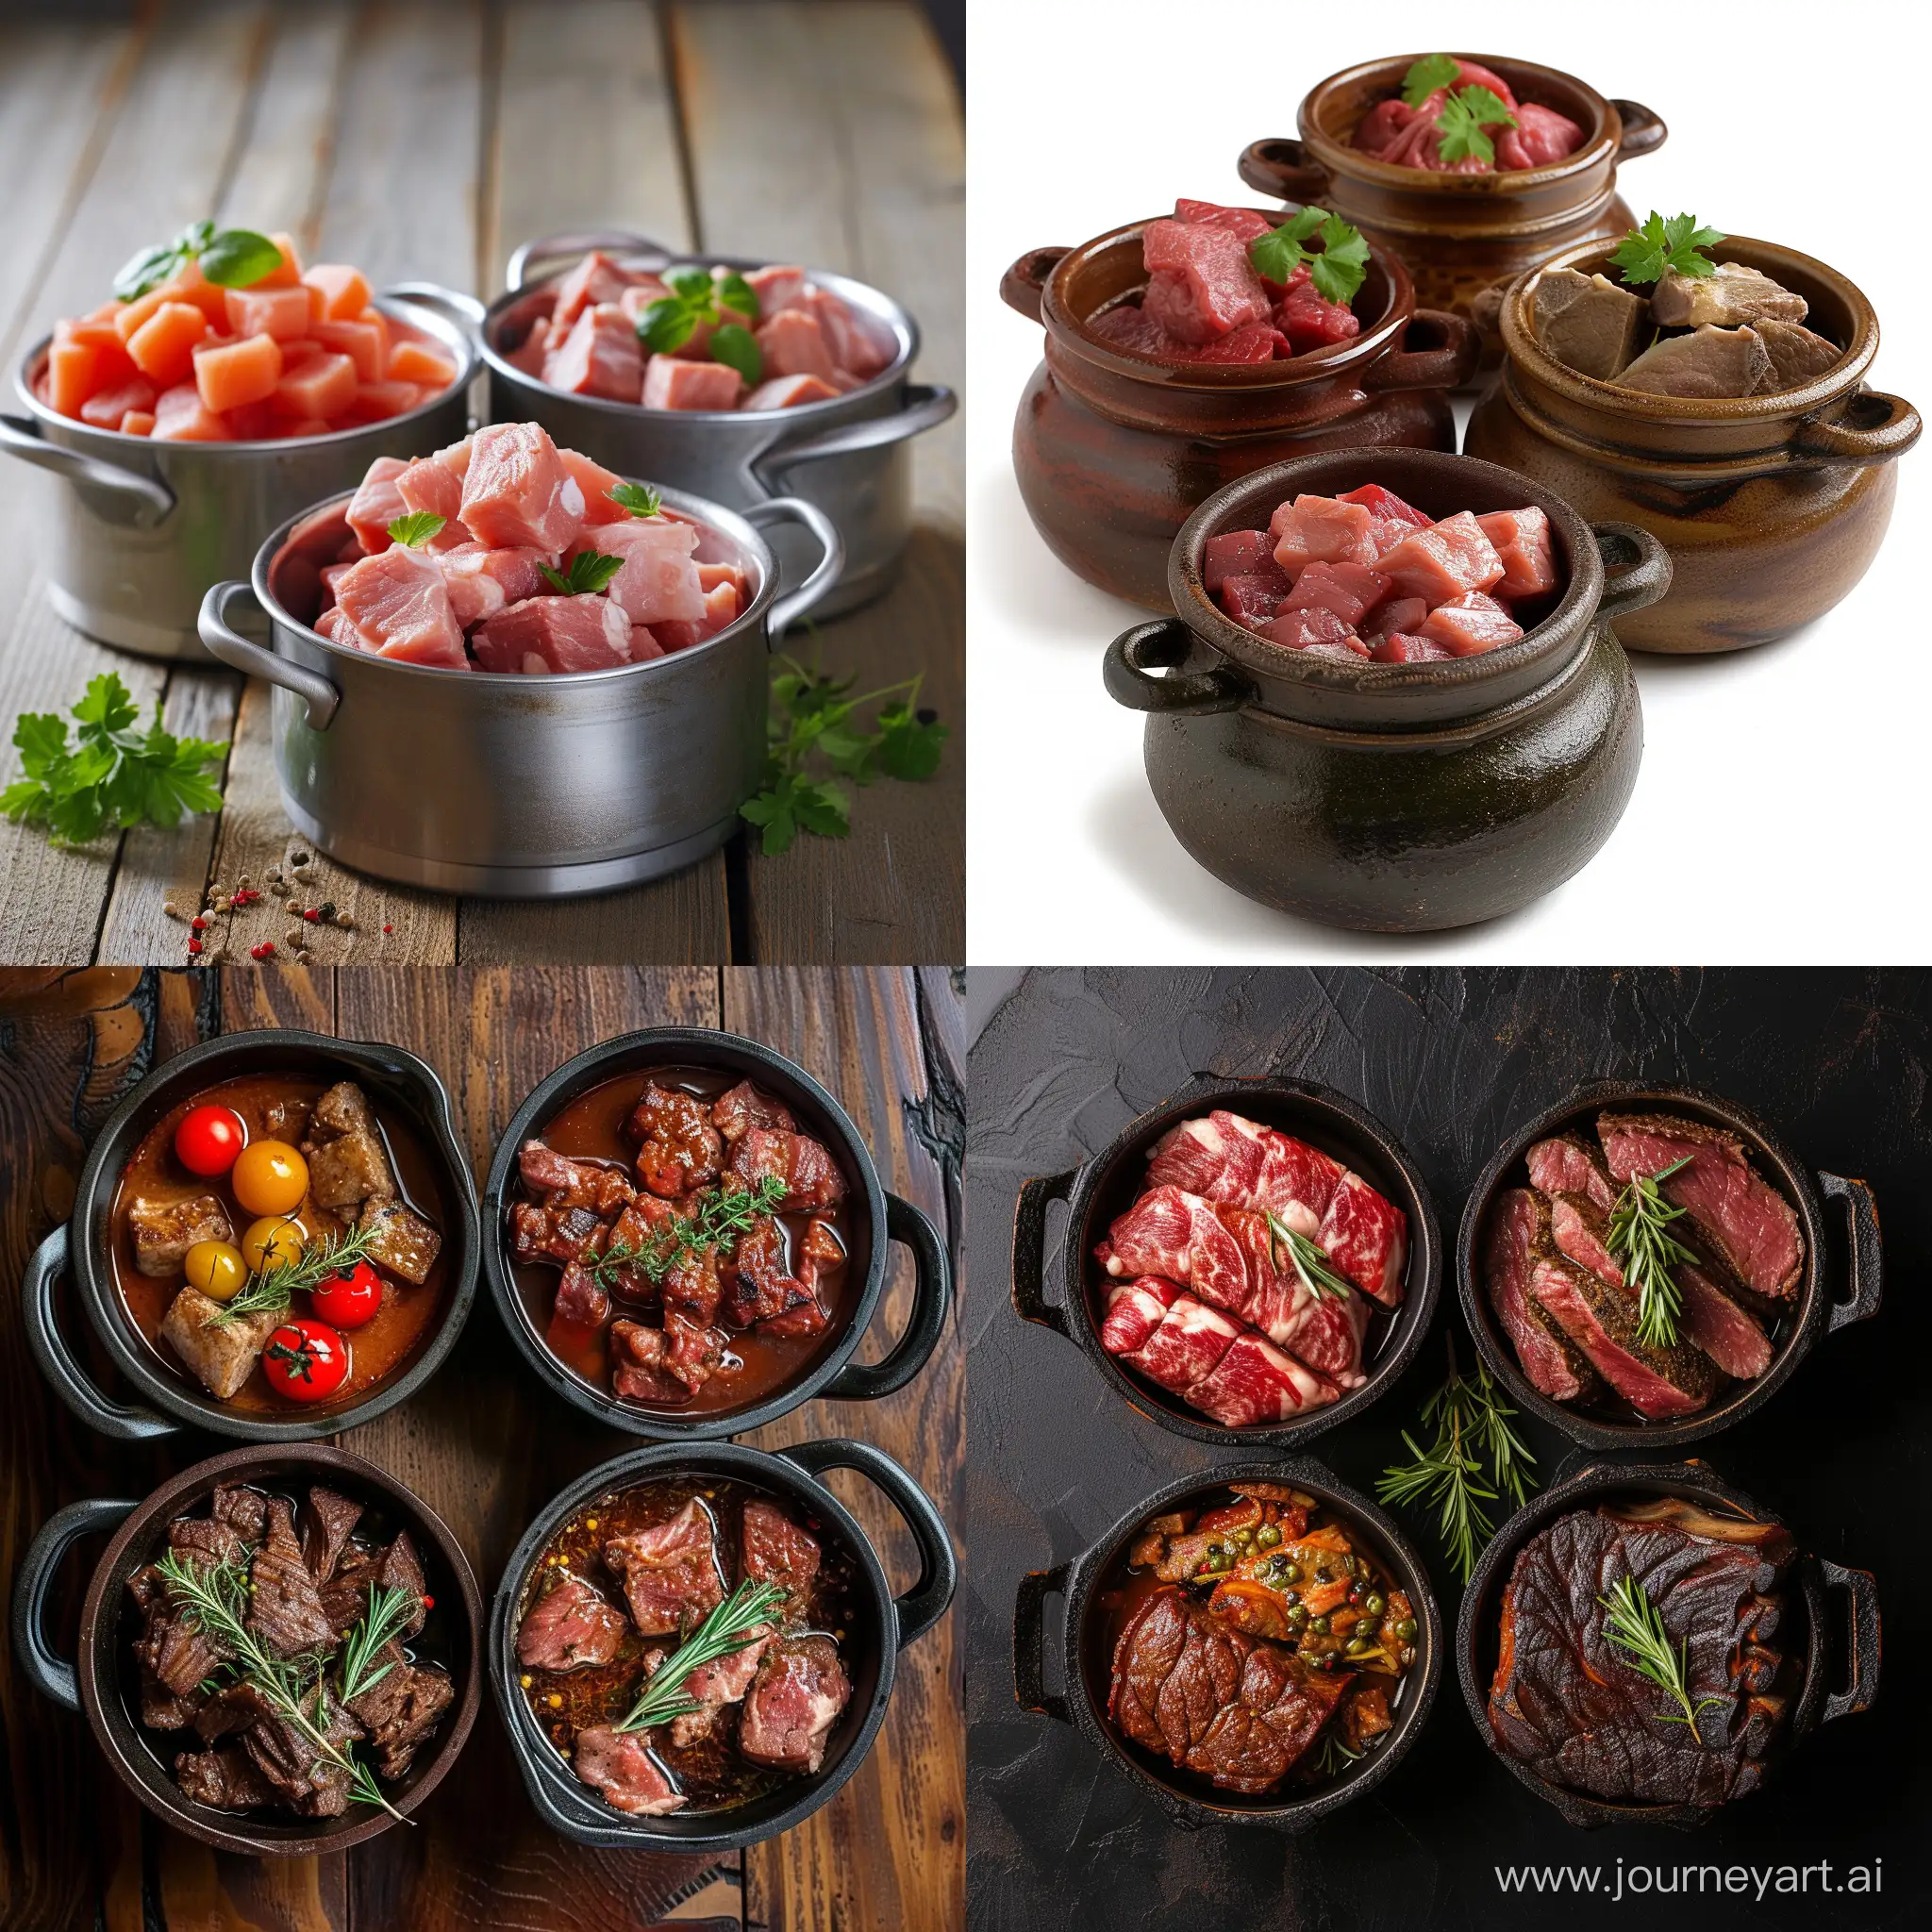 Savory-Meat-Delight-in-Cooking-Pots-Realistic-Food-Photography